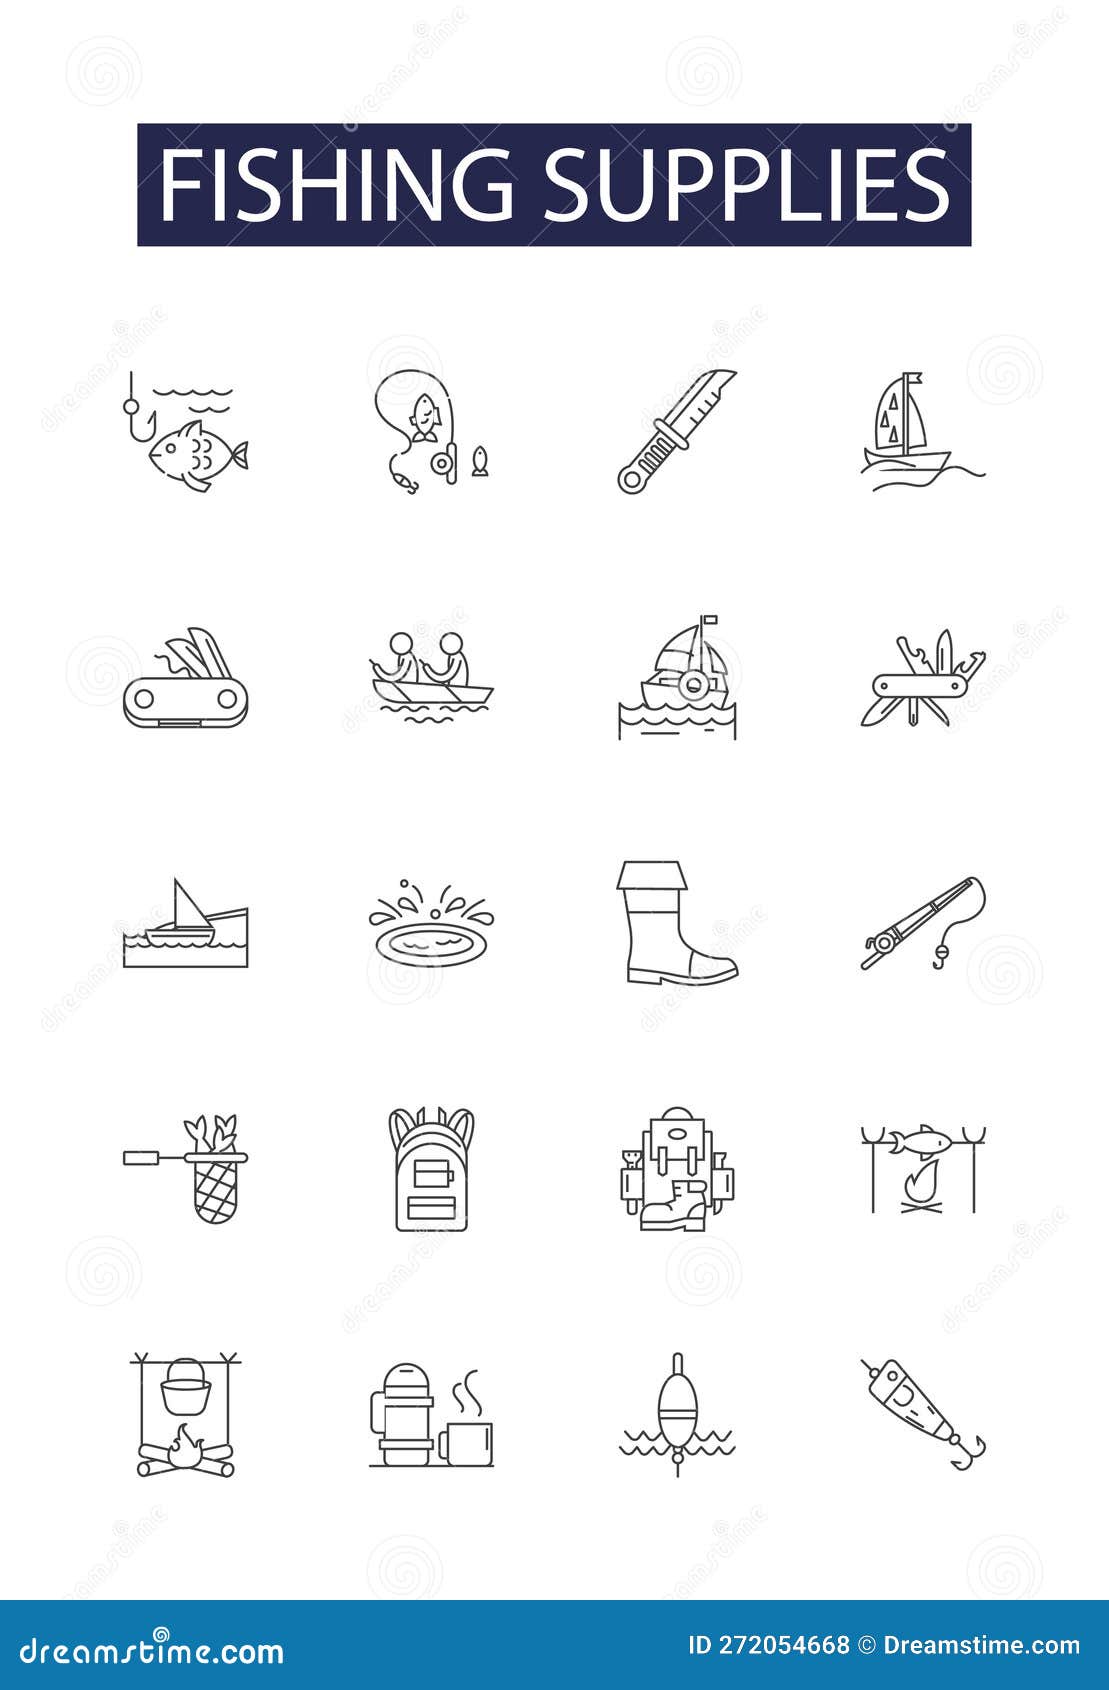 Fishing Supplies Line Vector Icons and Signs. Reels, Lures, Hooks